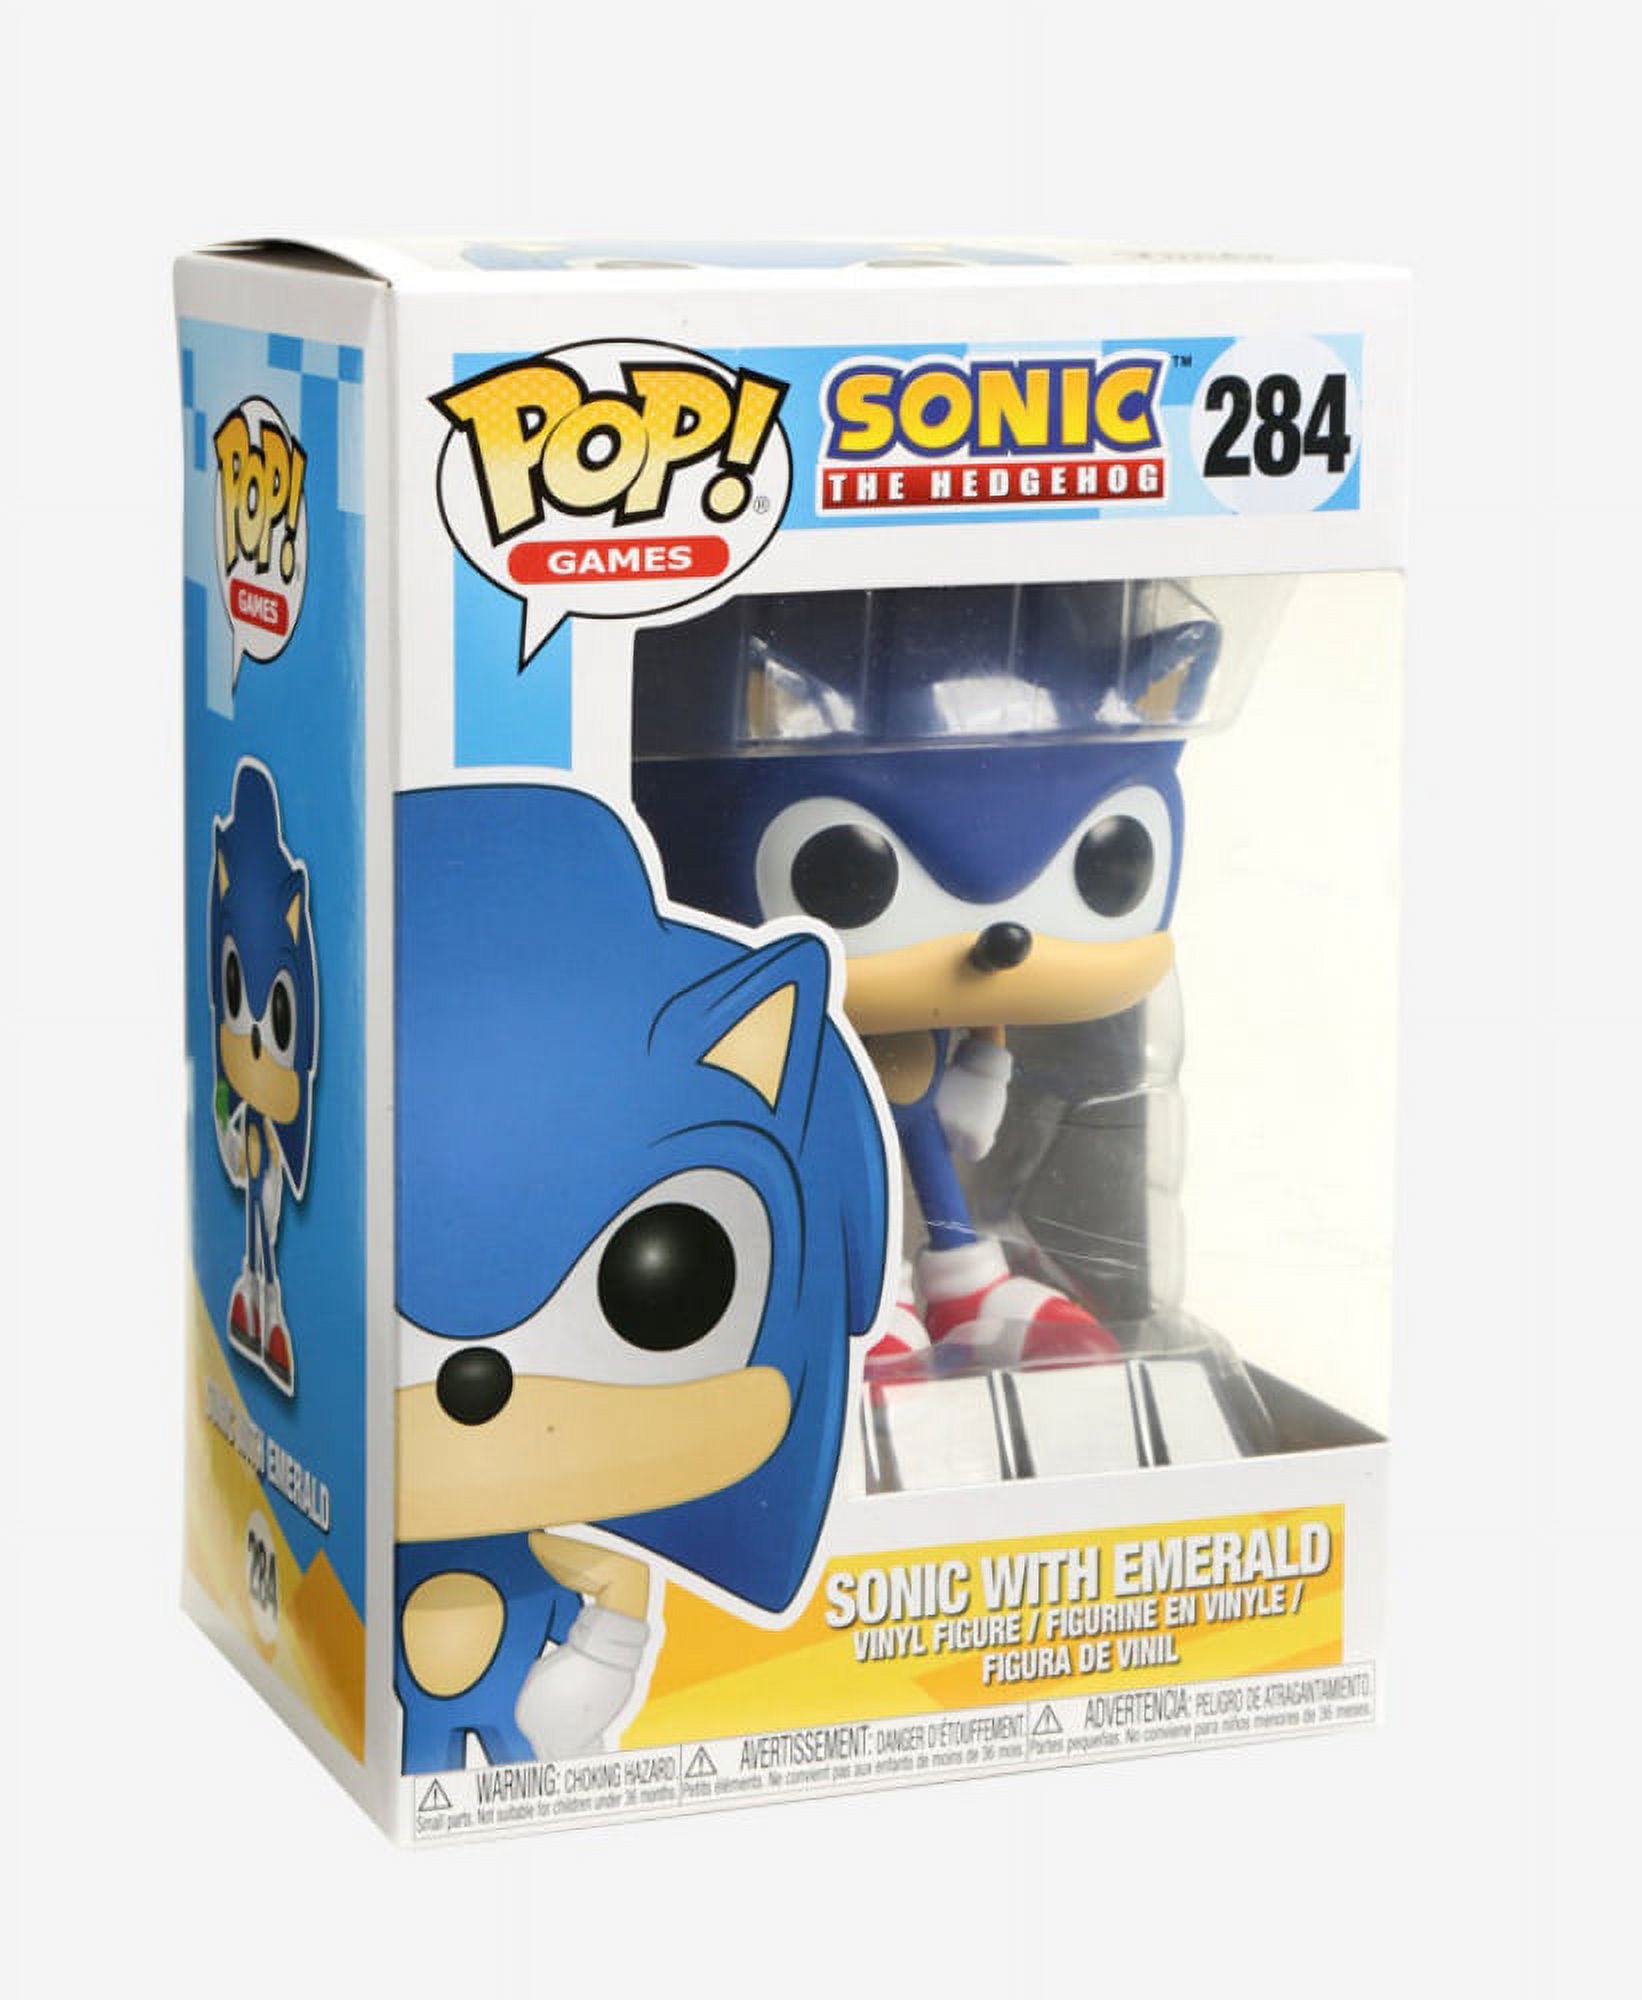 POP Games: Sonic - Sonic with Ring Collectible Toy, Multicolor, One Size